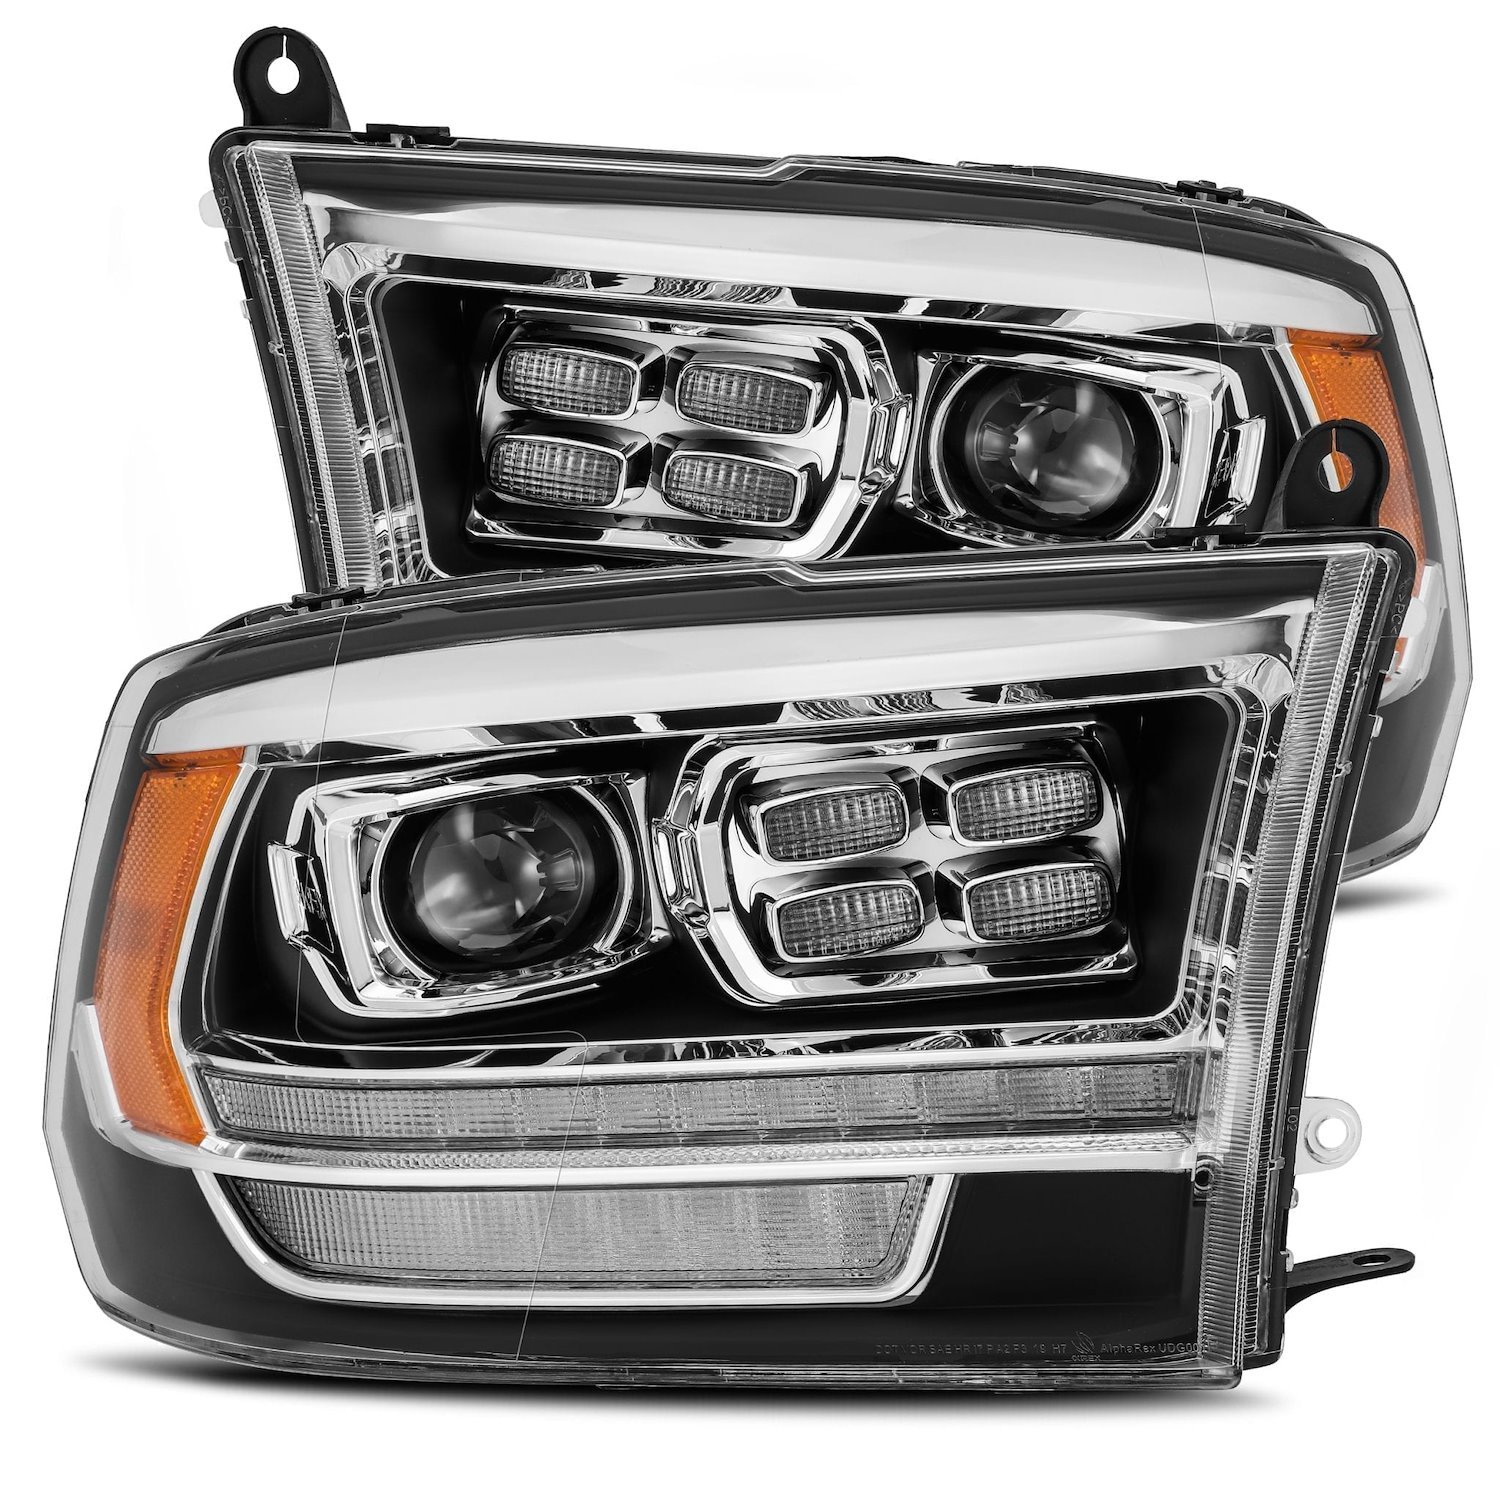 880526 Luxx-Series LED Projector Headlights for 2009-2018 Dodge/RAM 1500/2500/3500 - Black